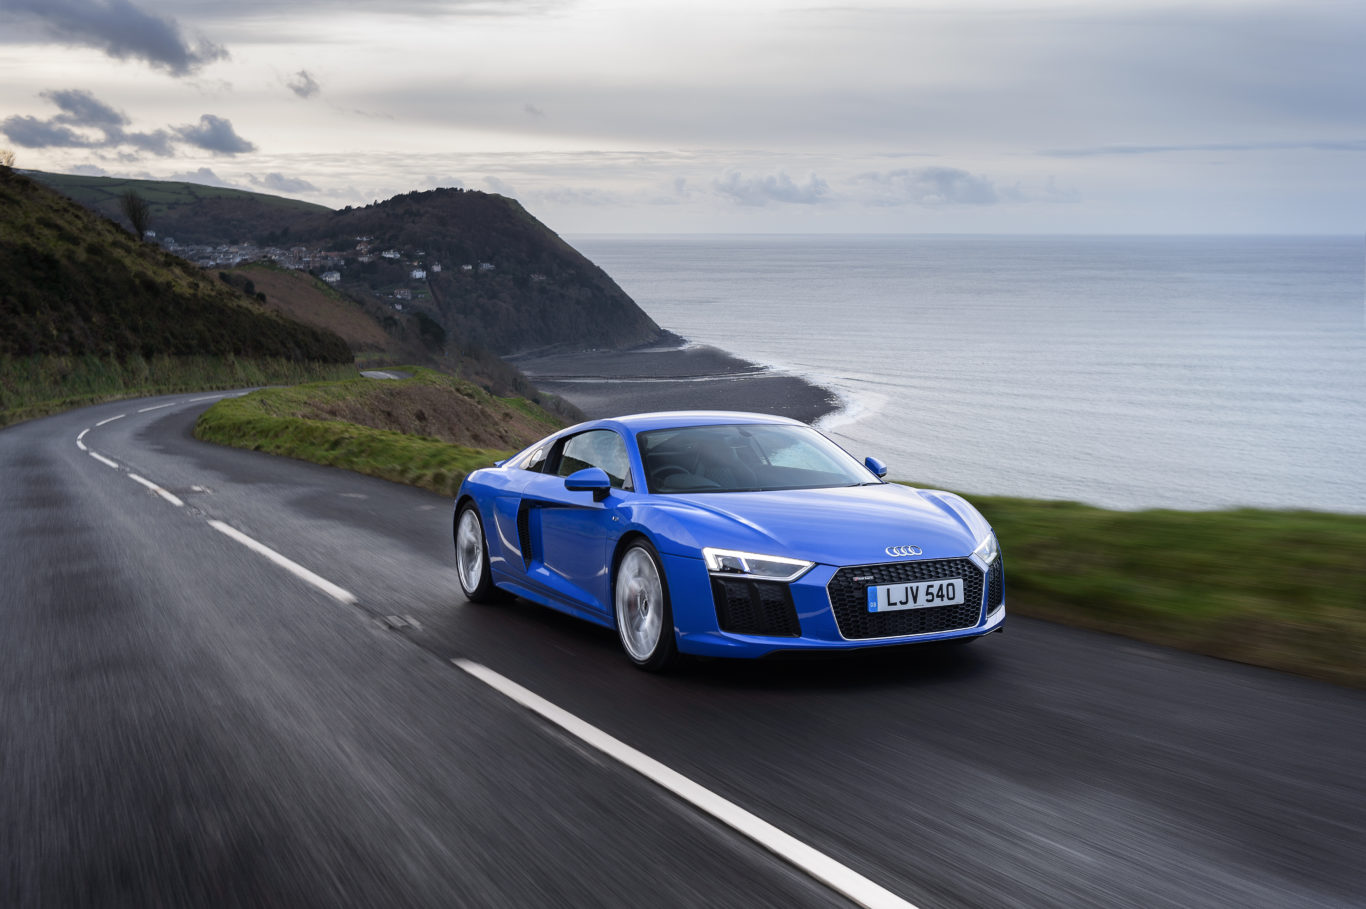 The RWS is significantly lighter than the regular R8